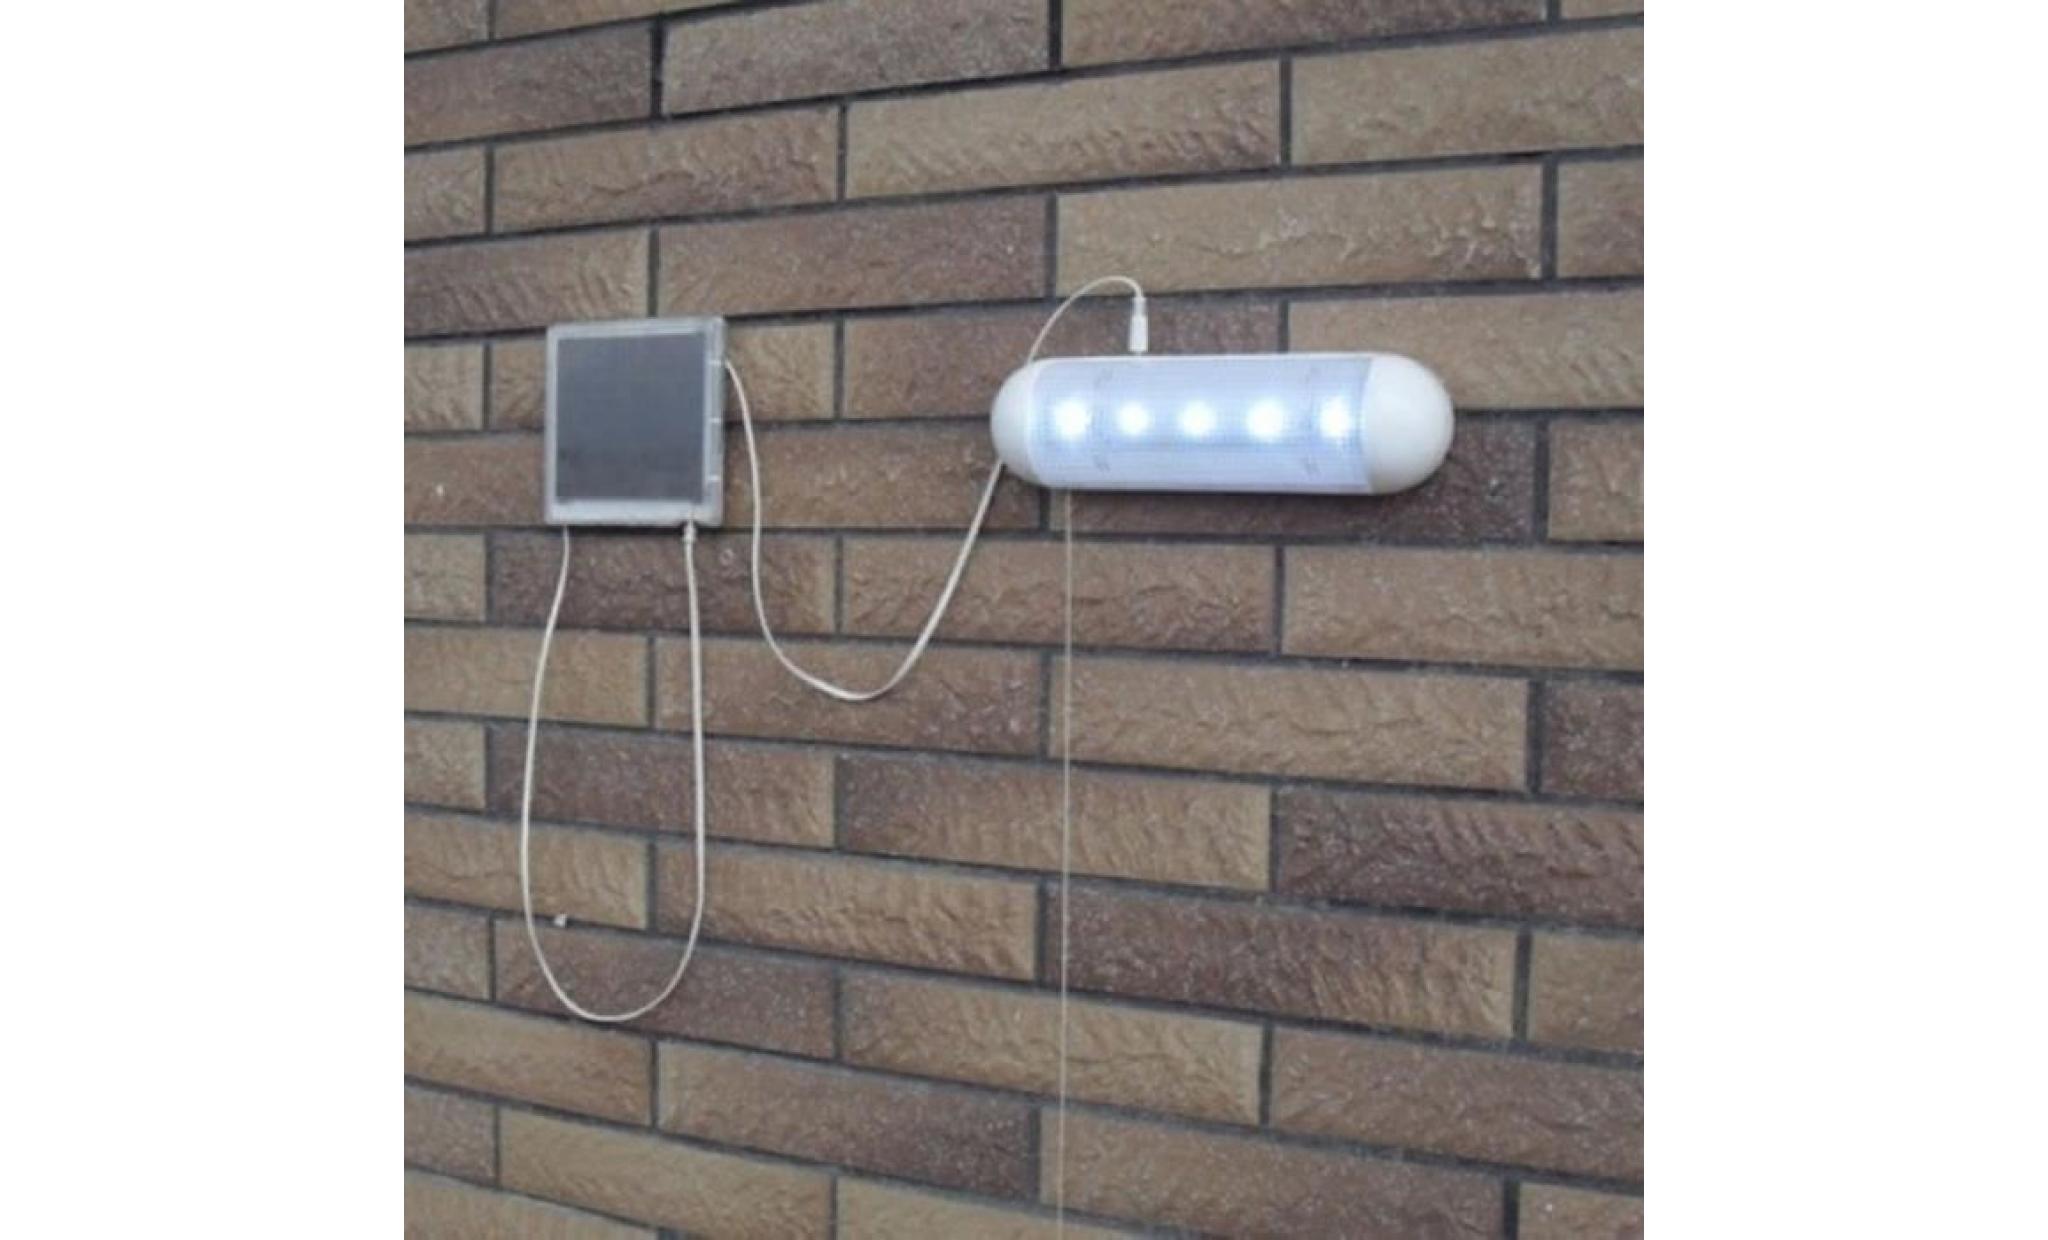 lumière populaire pull solaire fractionner lampes solaires intérieur 5 led extérieur lumière d'urgence anonywego927